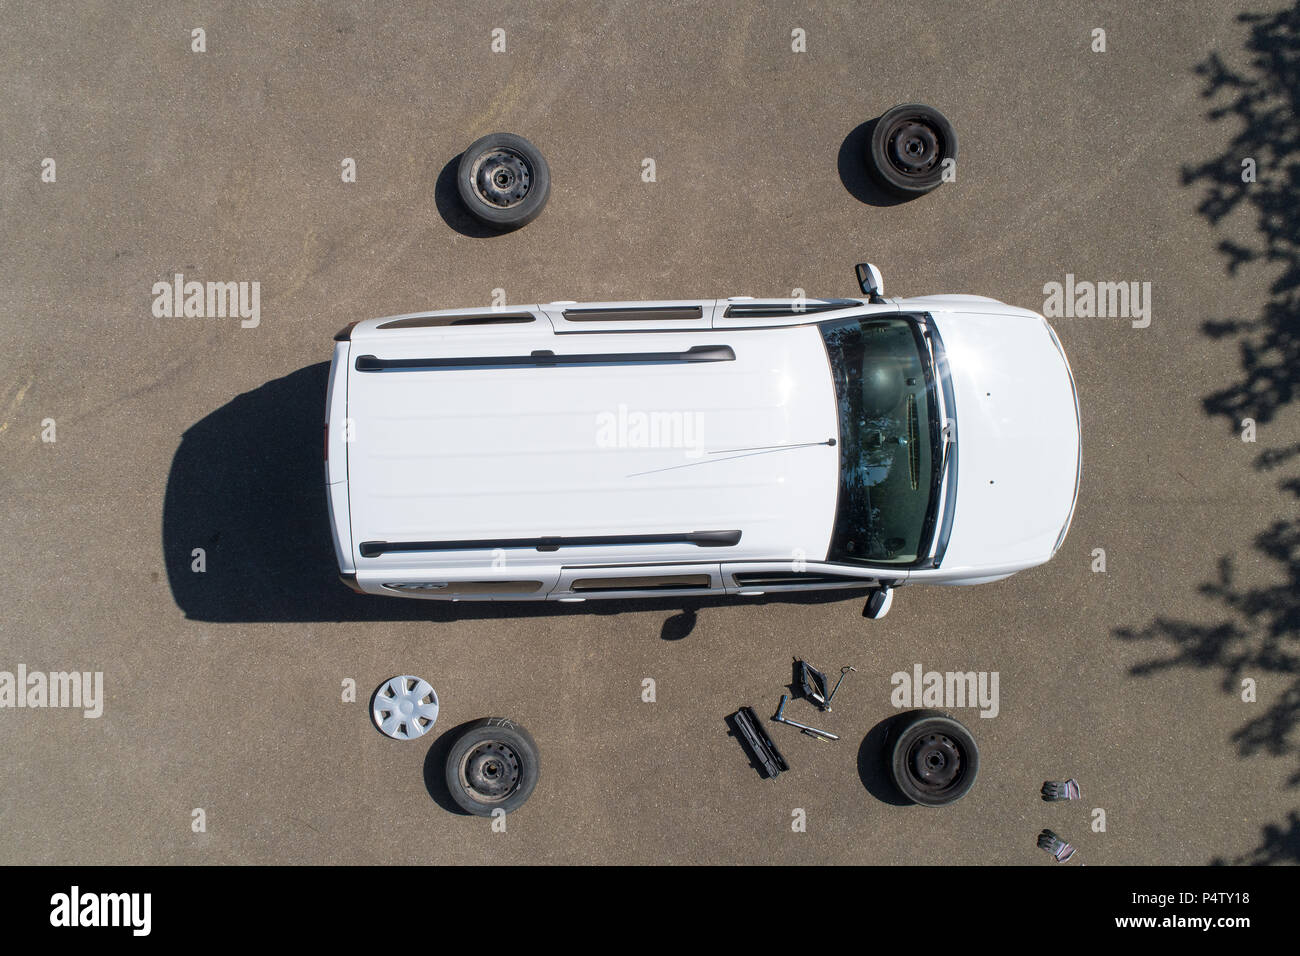 Changing car tires, top view Stock Photo